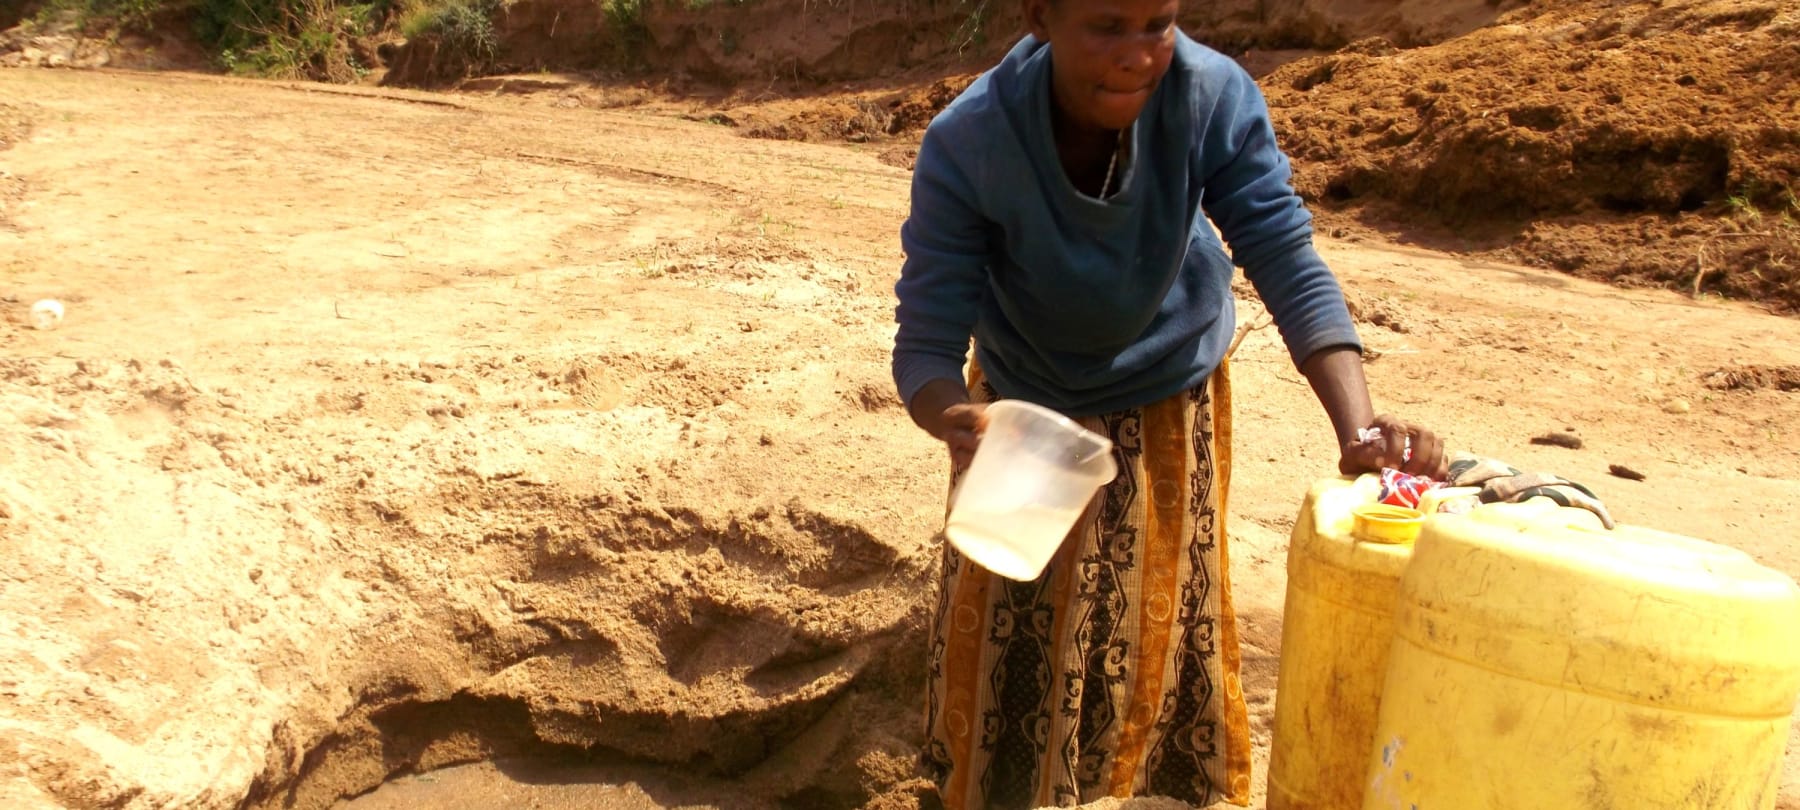 Kenya’s push for clean water and Excellent Development’s commitment to drylands